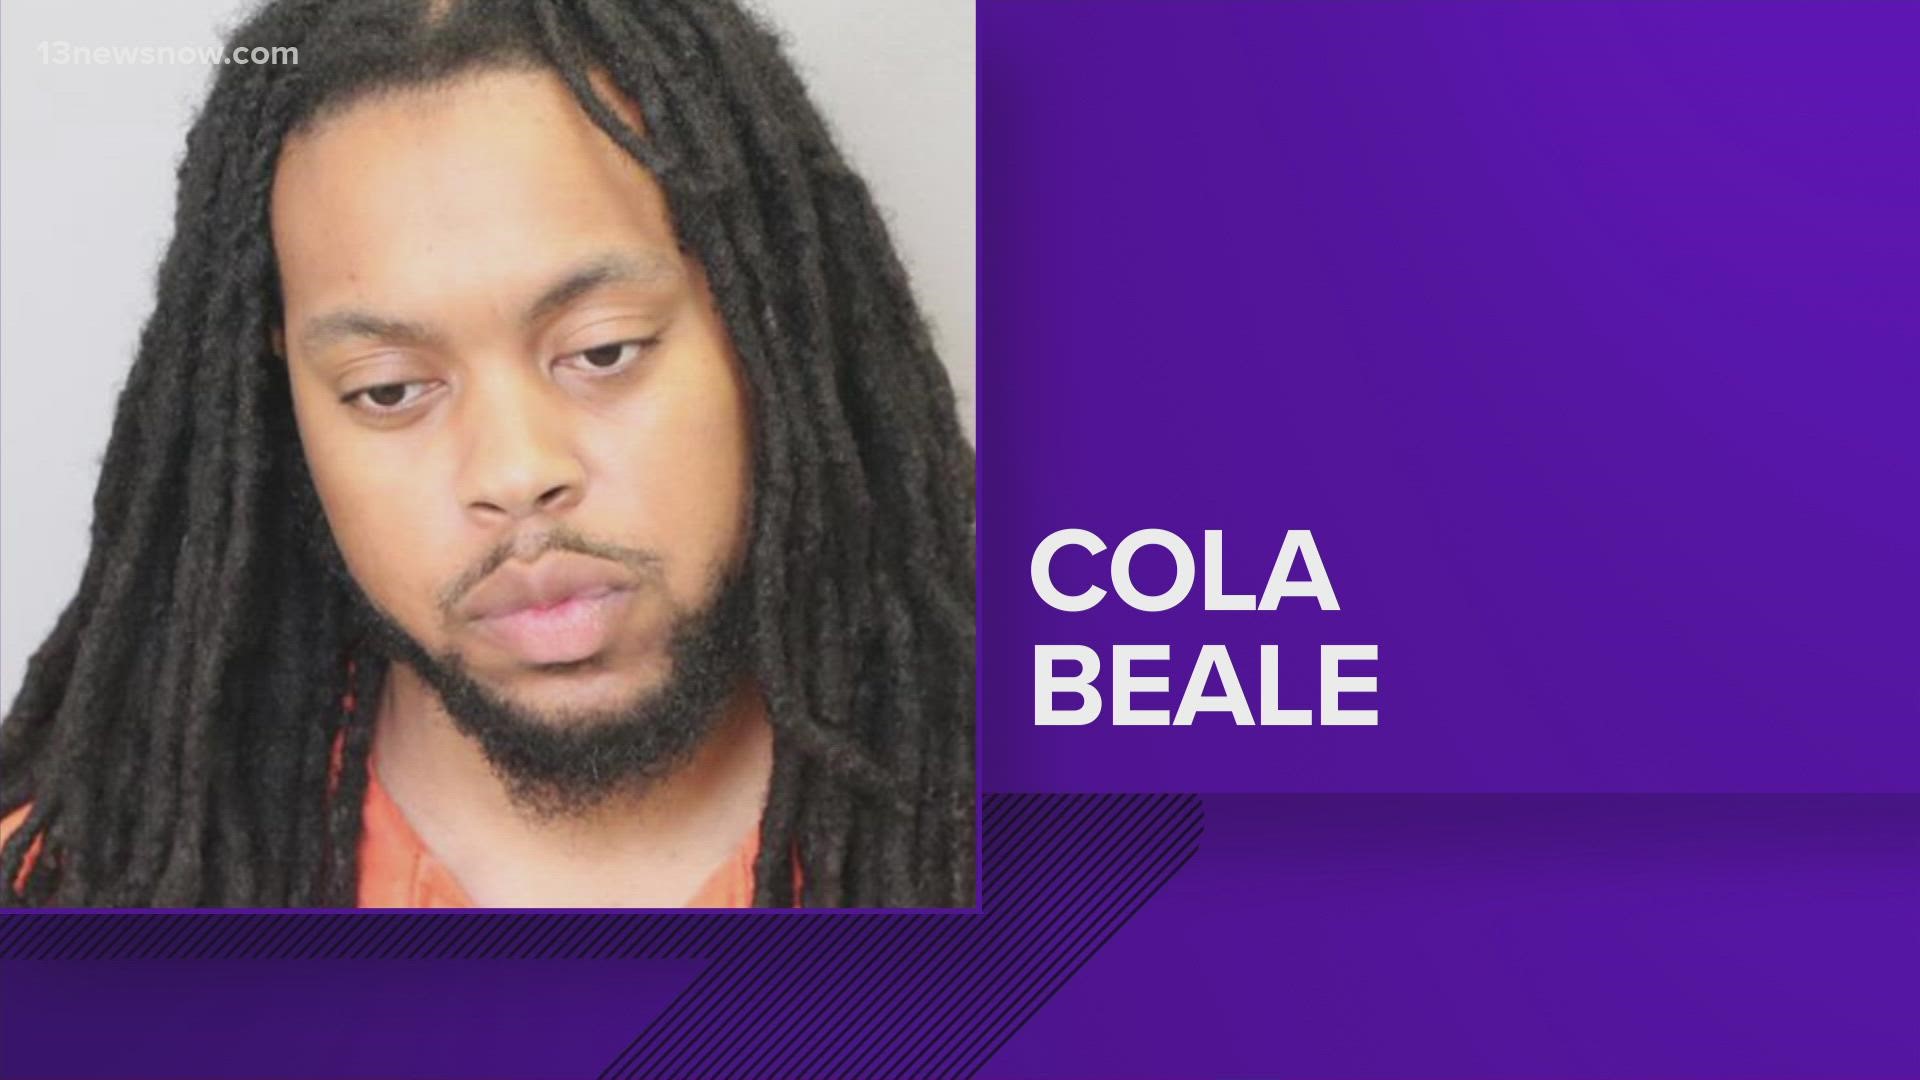 Cola Beale IV, 30, said in jailhouse interviews that he killed his girlfriend and a father figure in Virginia Beach and that he murdered his cousin in Norfolk.